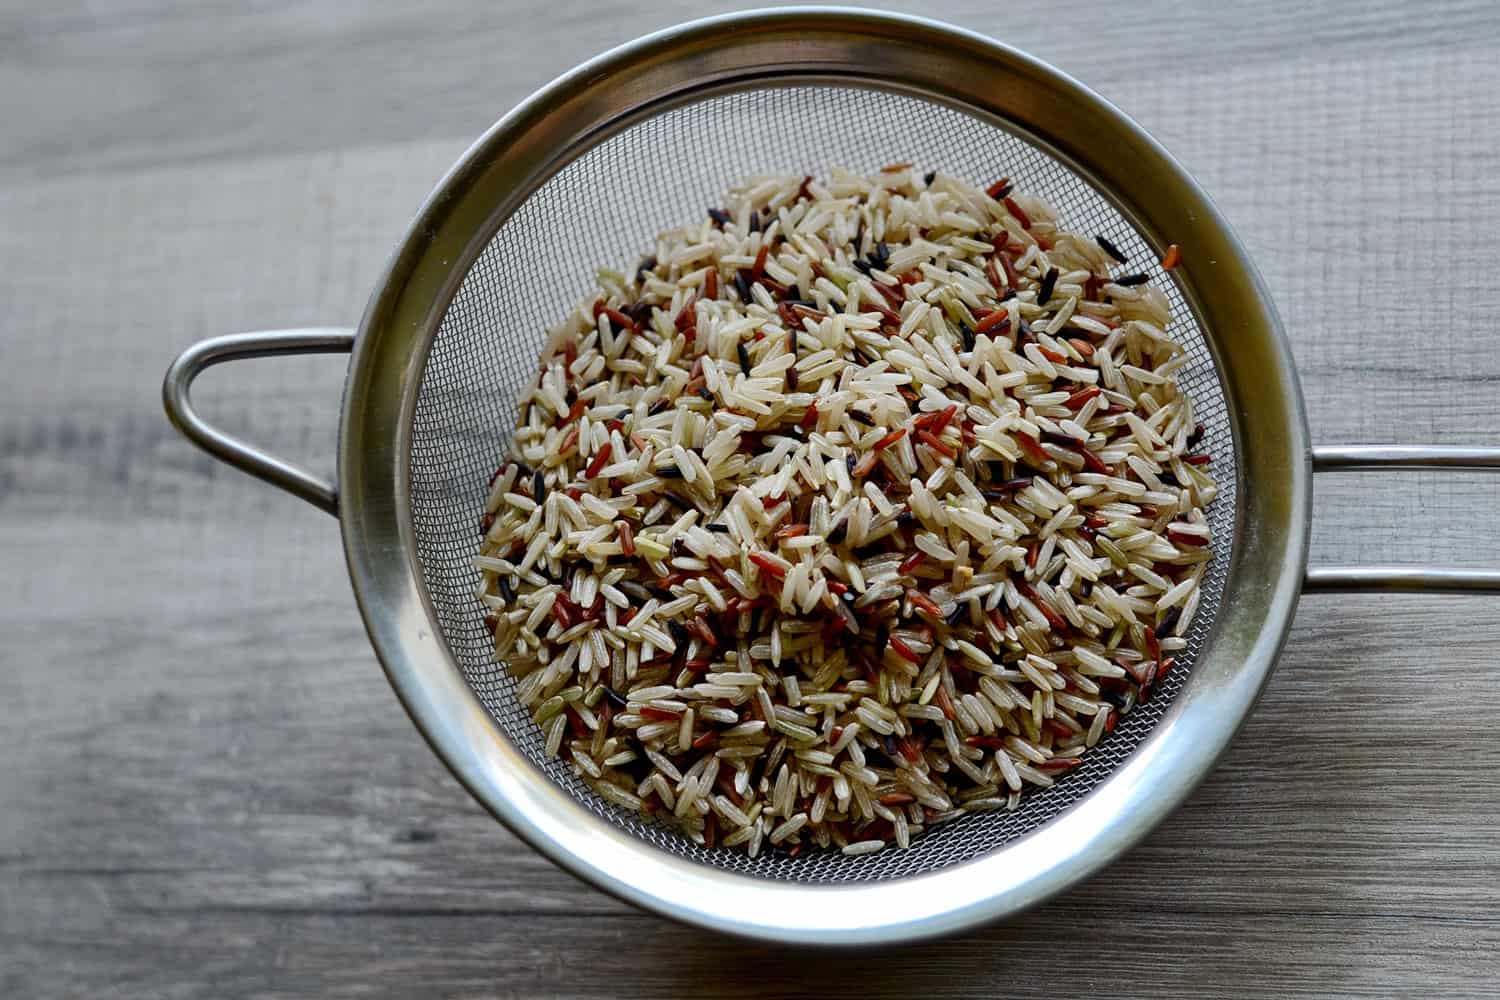 Mixture of long unpolished white and brown rice in a metallic strainer